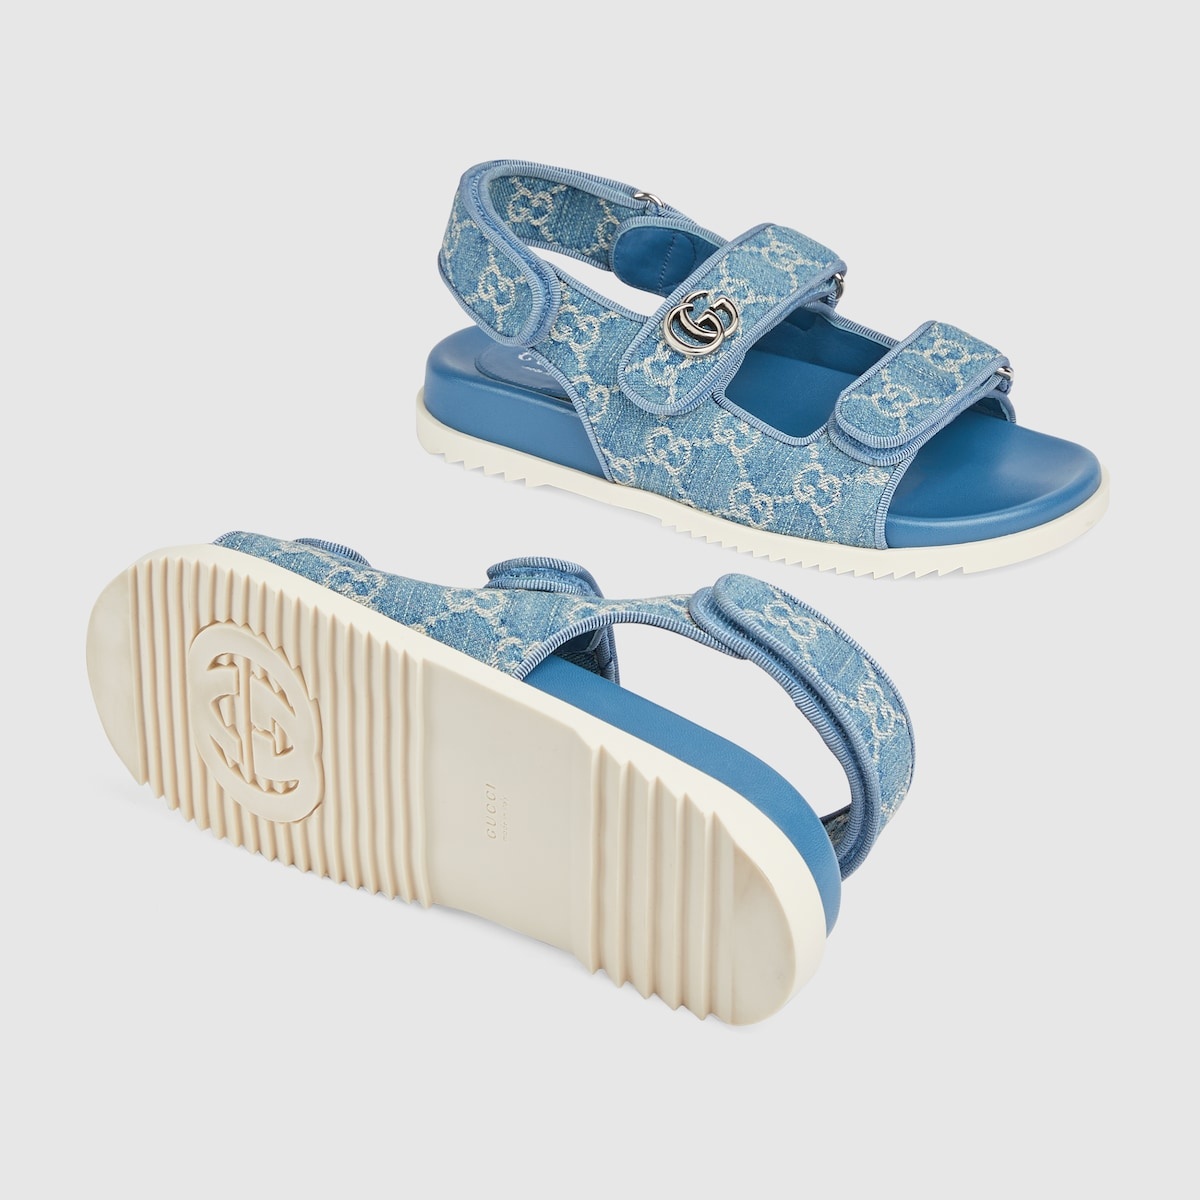 Women's sandal with Double G - 6